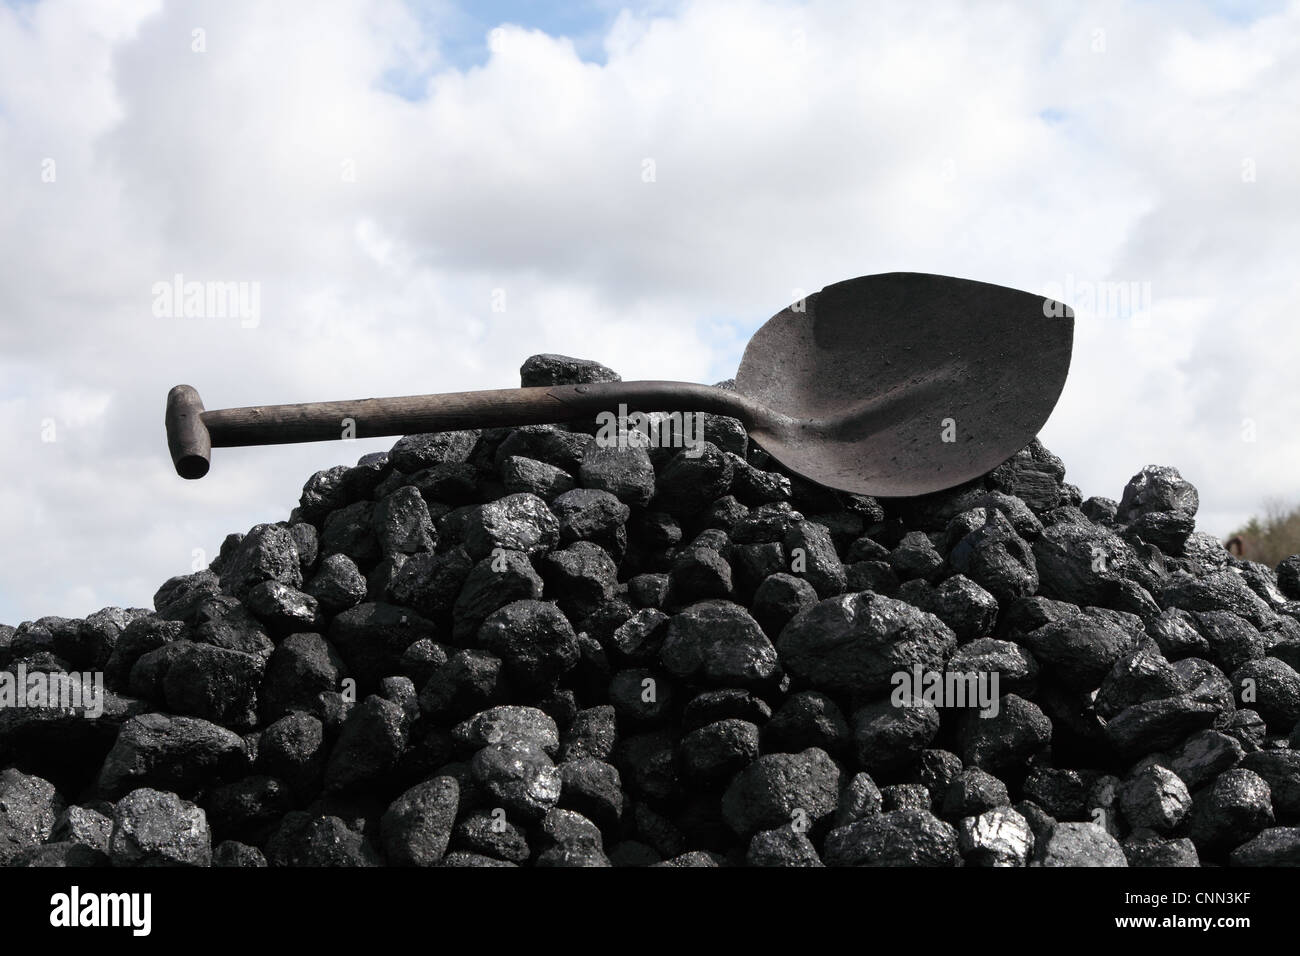 A shovel lying on top of a pile of coal at the North of England Open Air Museum Beamish NE England UK Stock Photo